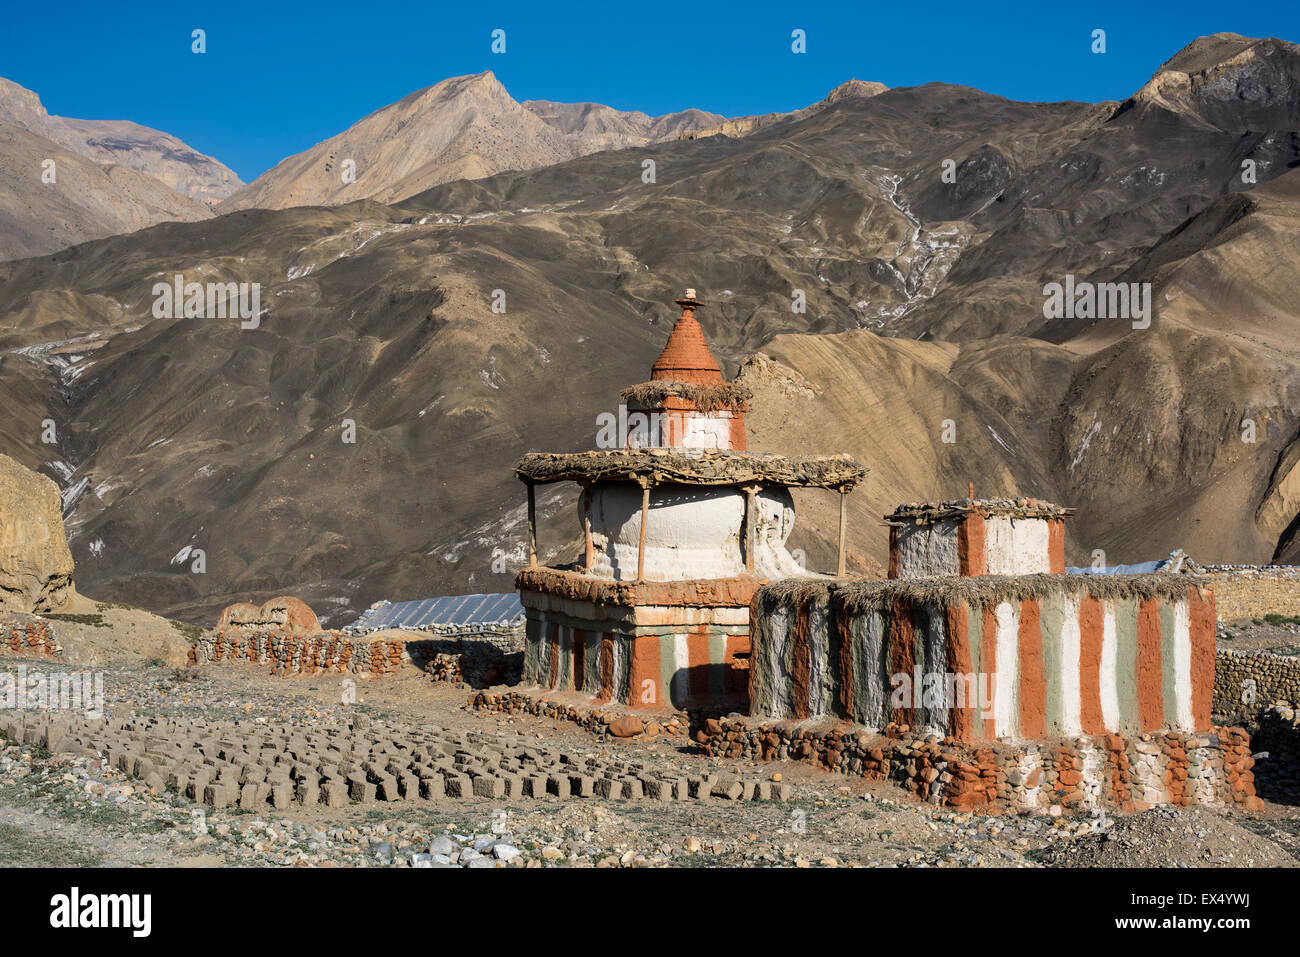 Buddhist stupas in front of mountain landscape, prayer or reliquary shrine, dried mud or adobe bricks on the ground, Tangge Stock Photo